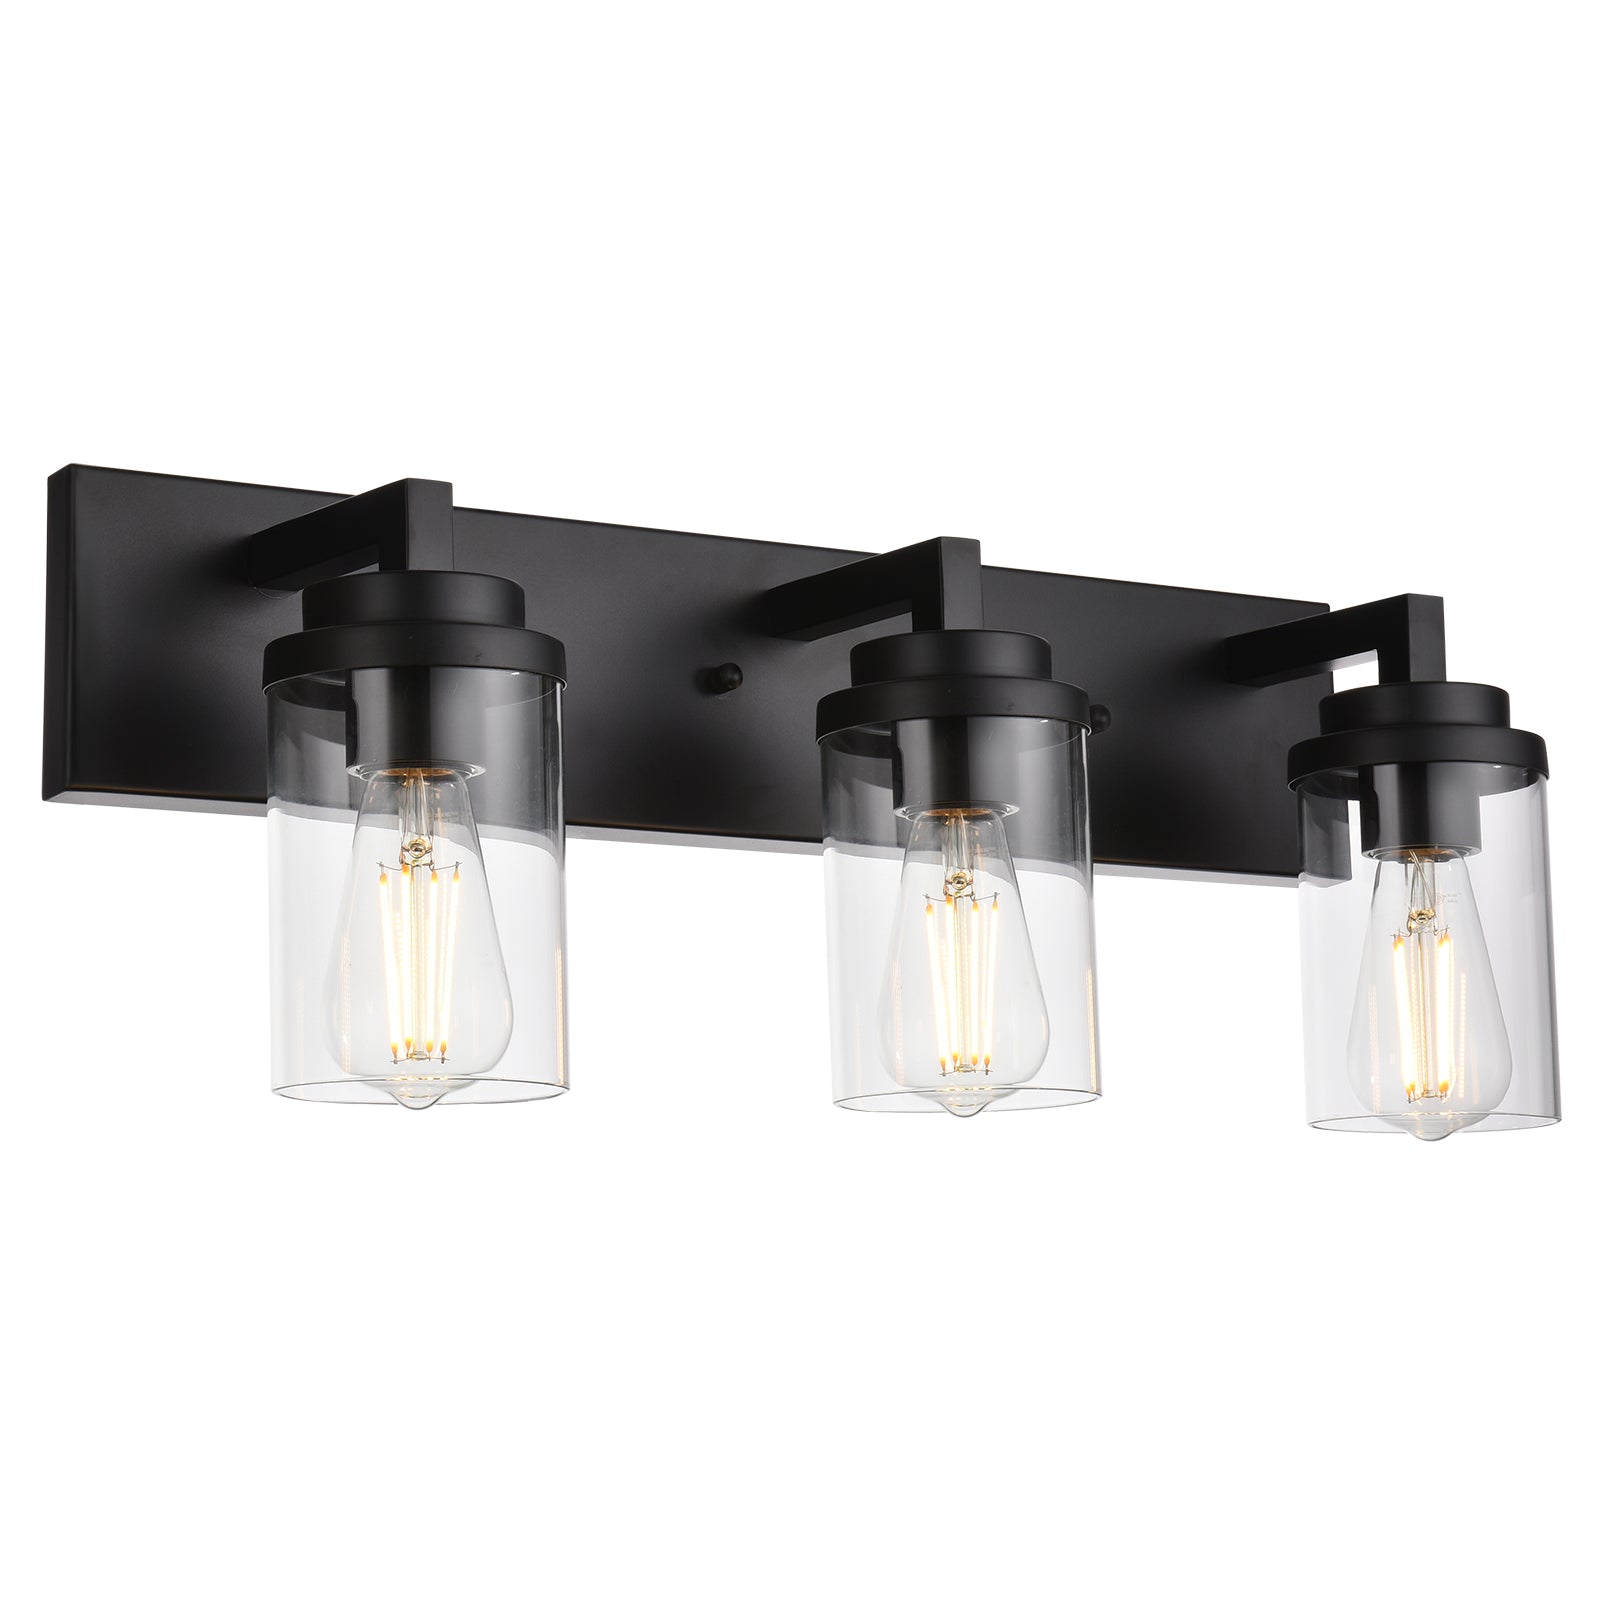 Vintage Bathroom Lighting Fixtures Over Mirror, 3-Light Modern Vanity Lights Black Finish Industrial Wall Sconce with Clear Glass Shade